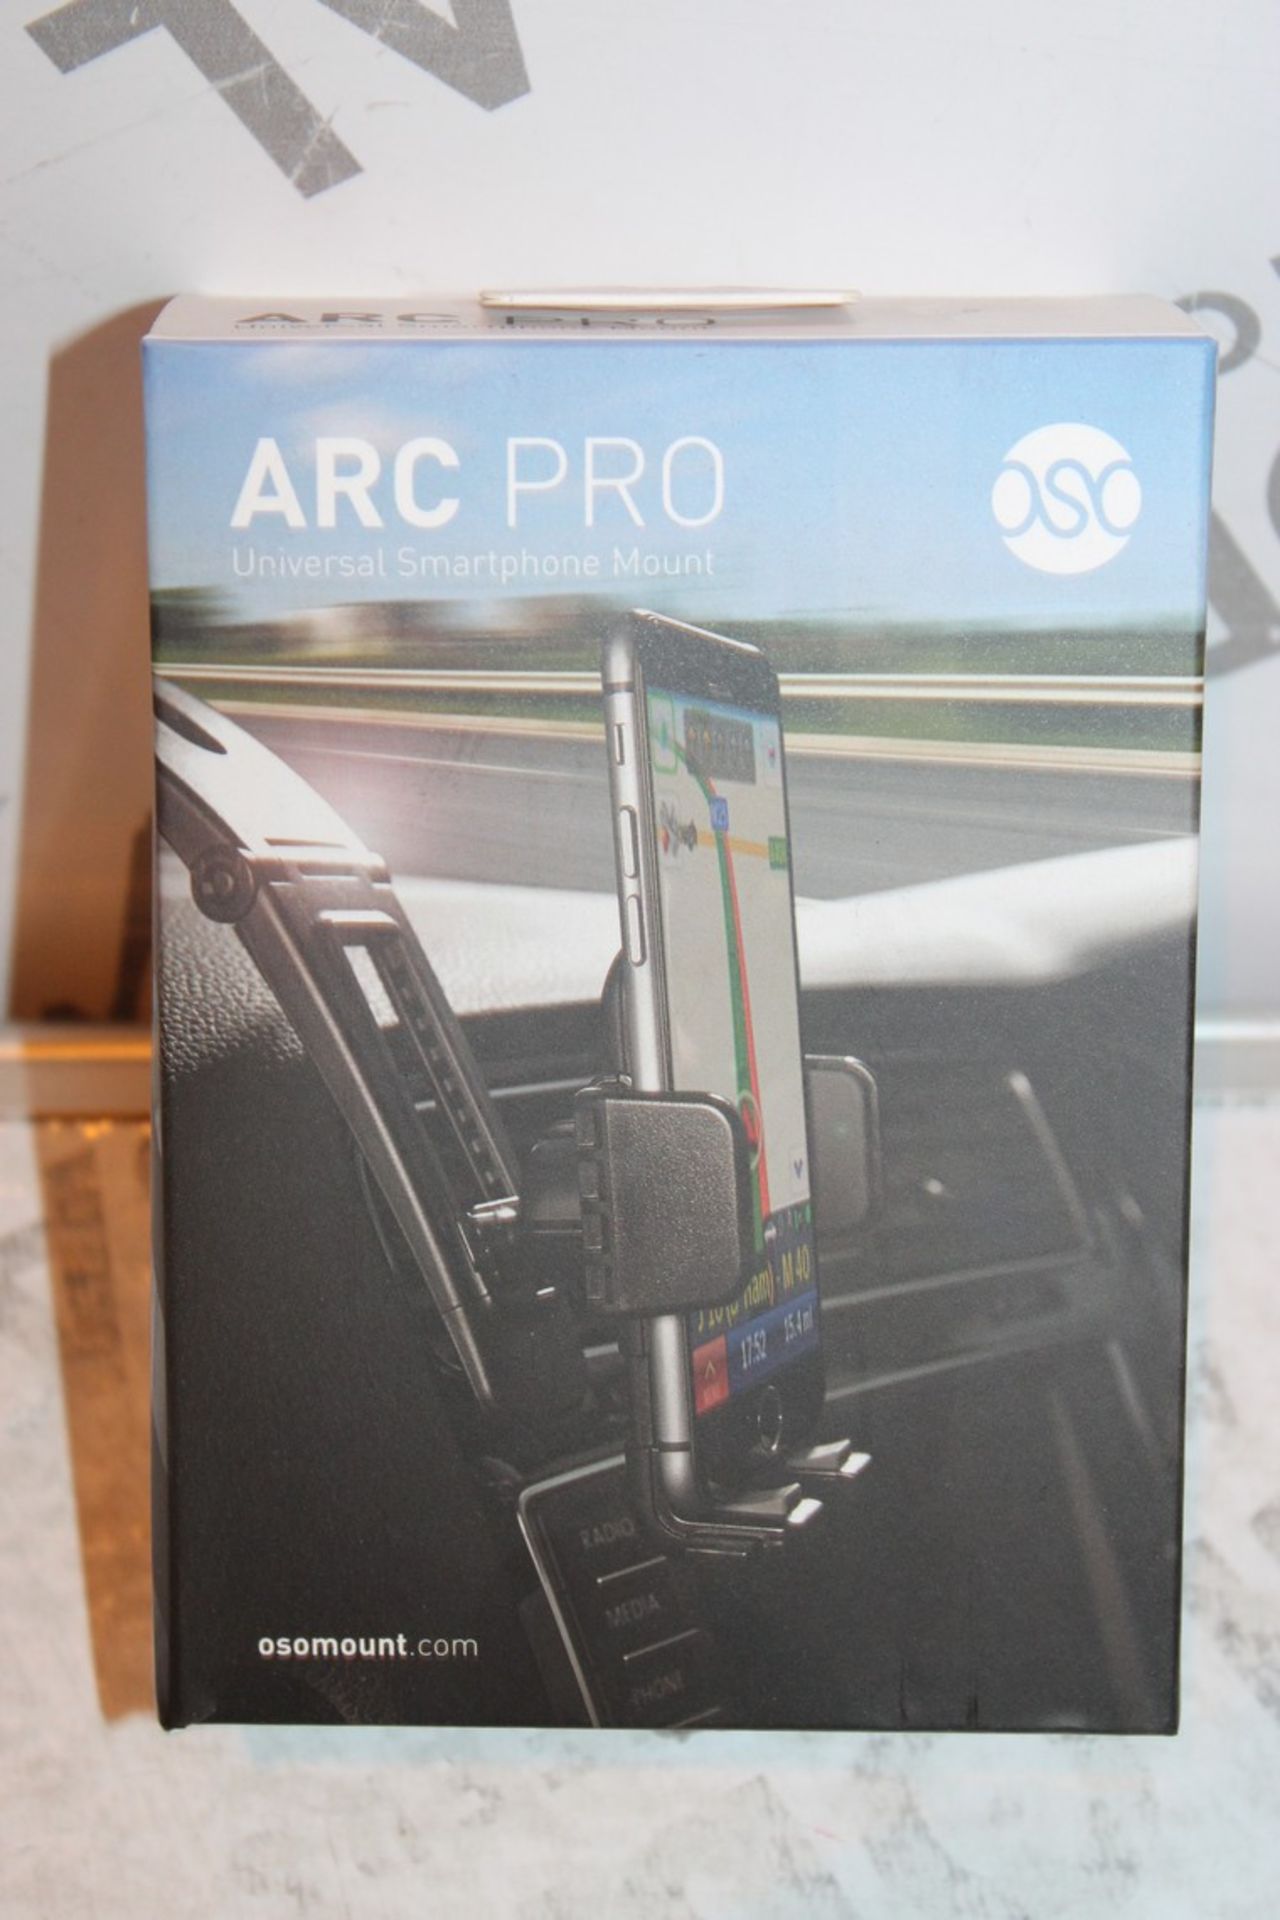 Lot to Contain 3 ASA Arc Pro Universal Smart Phone Mount Combined RRP £90